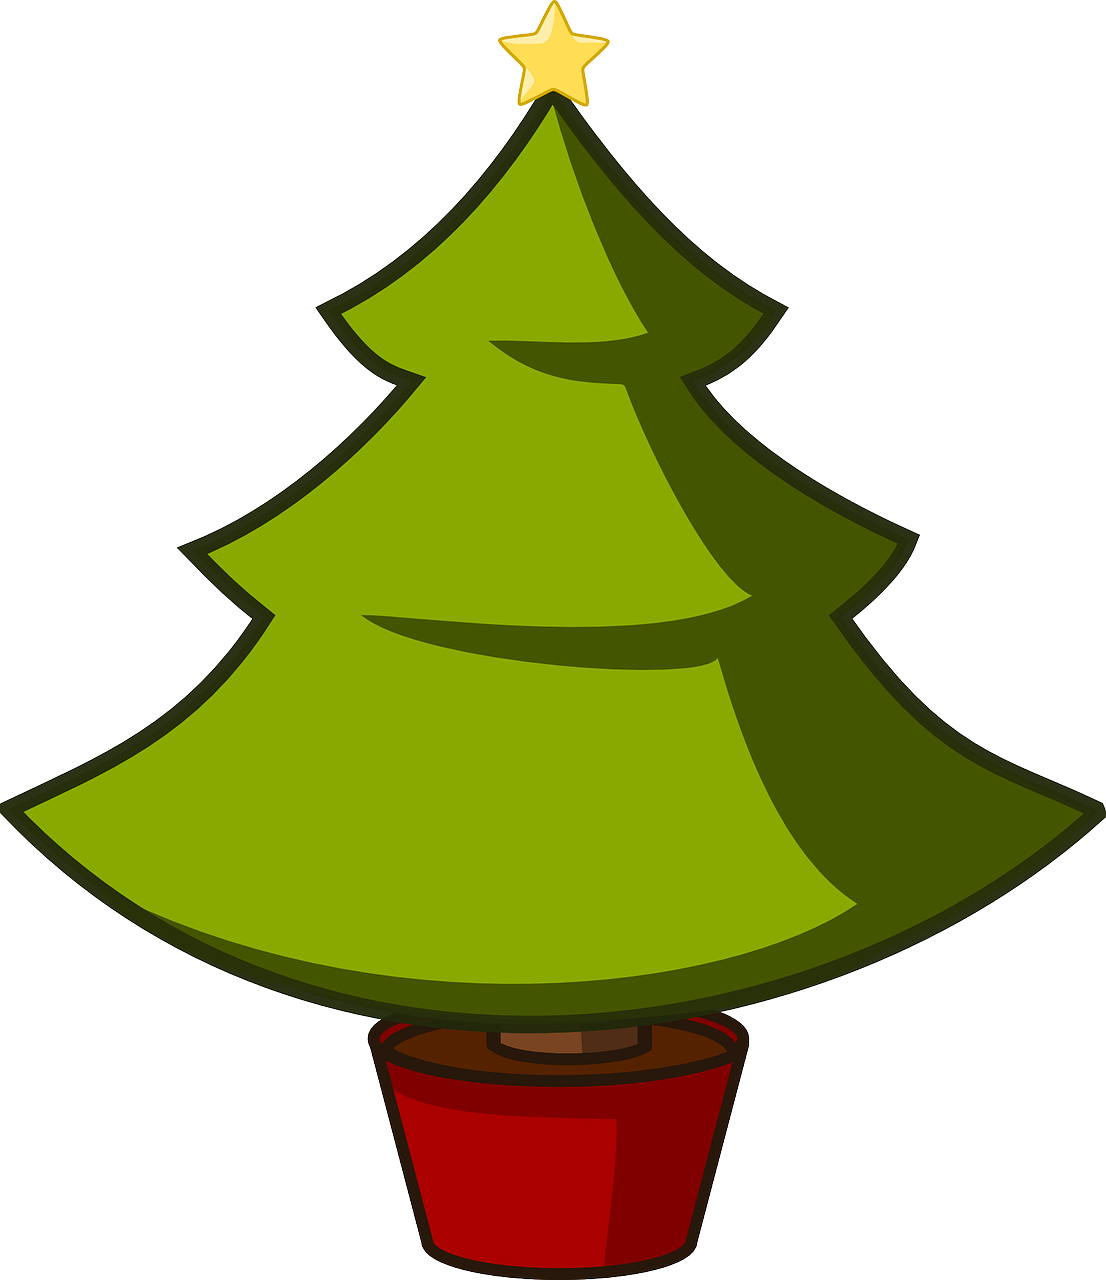 How to draw a Christmas tree 10 pics HOWTODRAW in 1